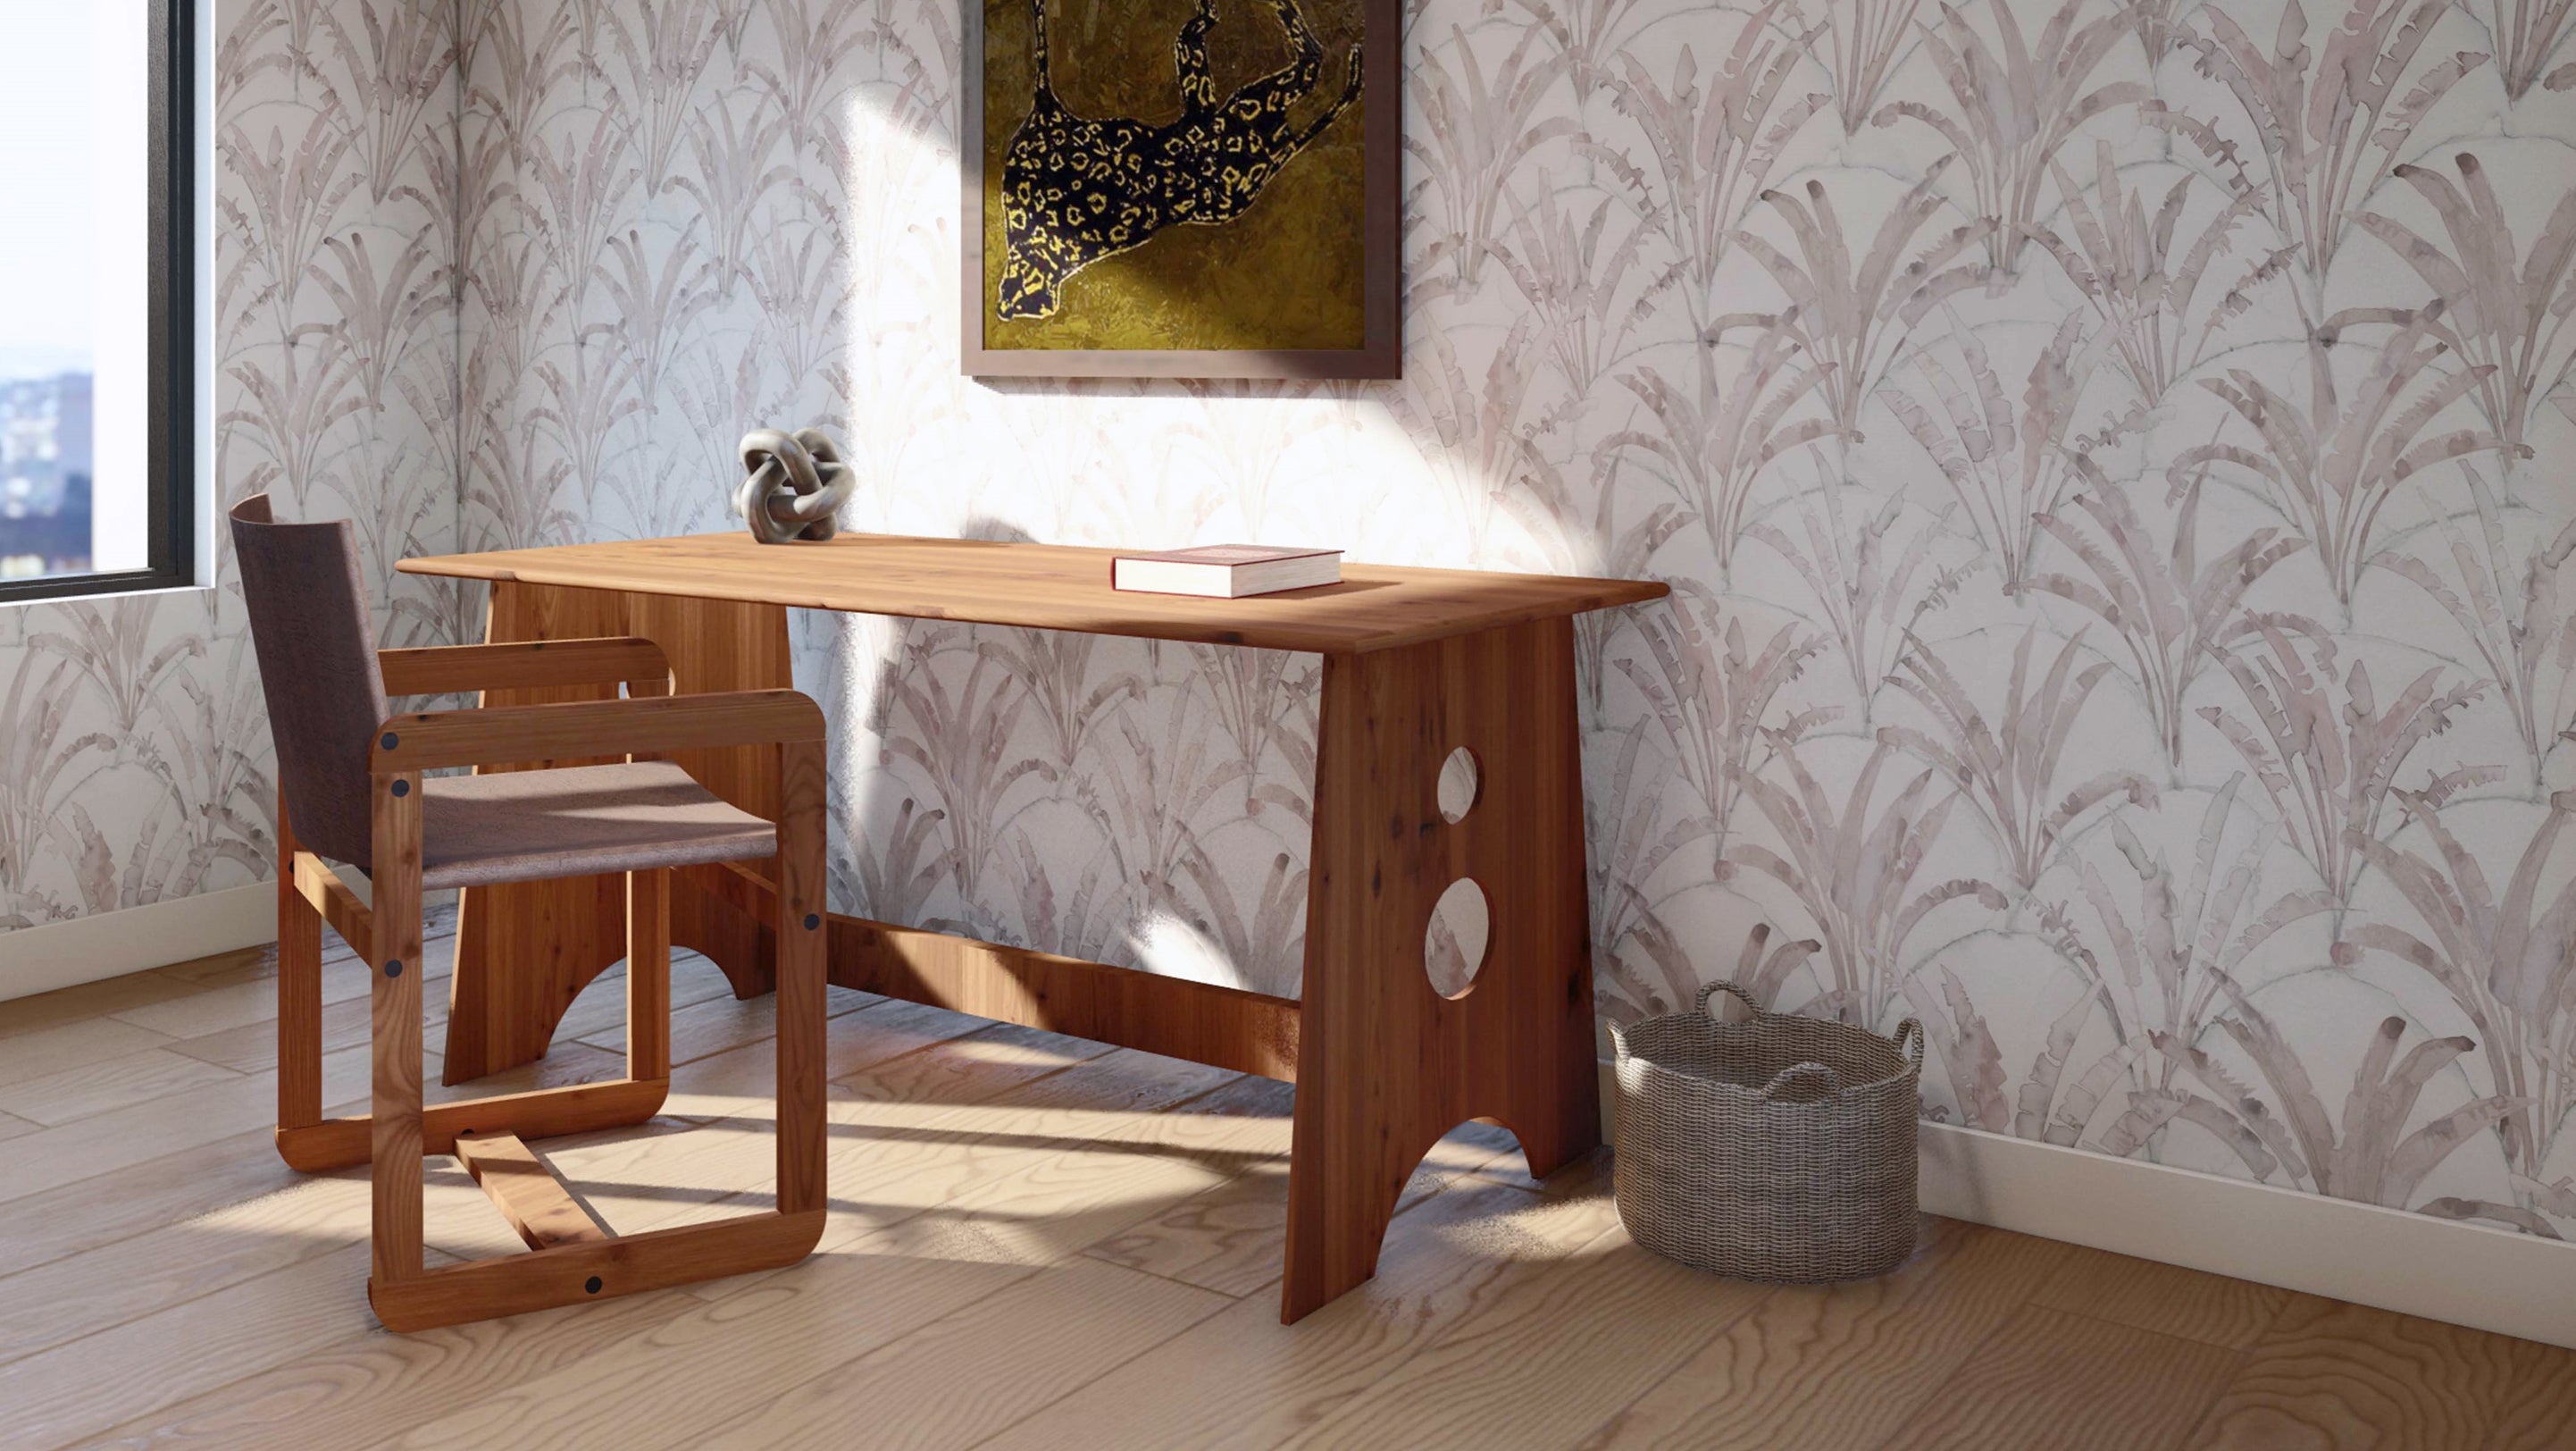 A desk and chair in a room with wallpaper